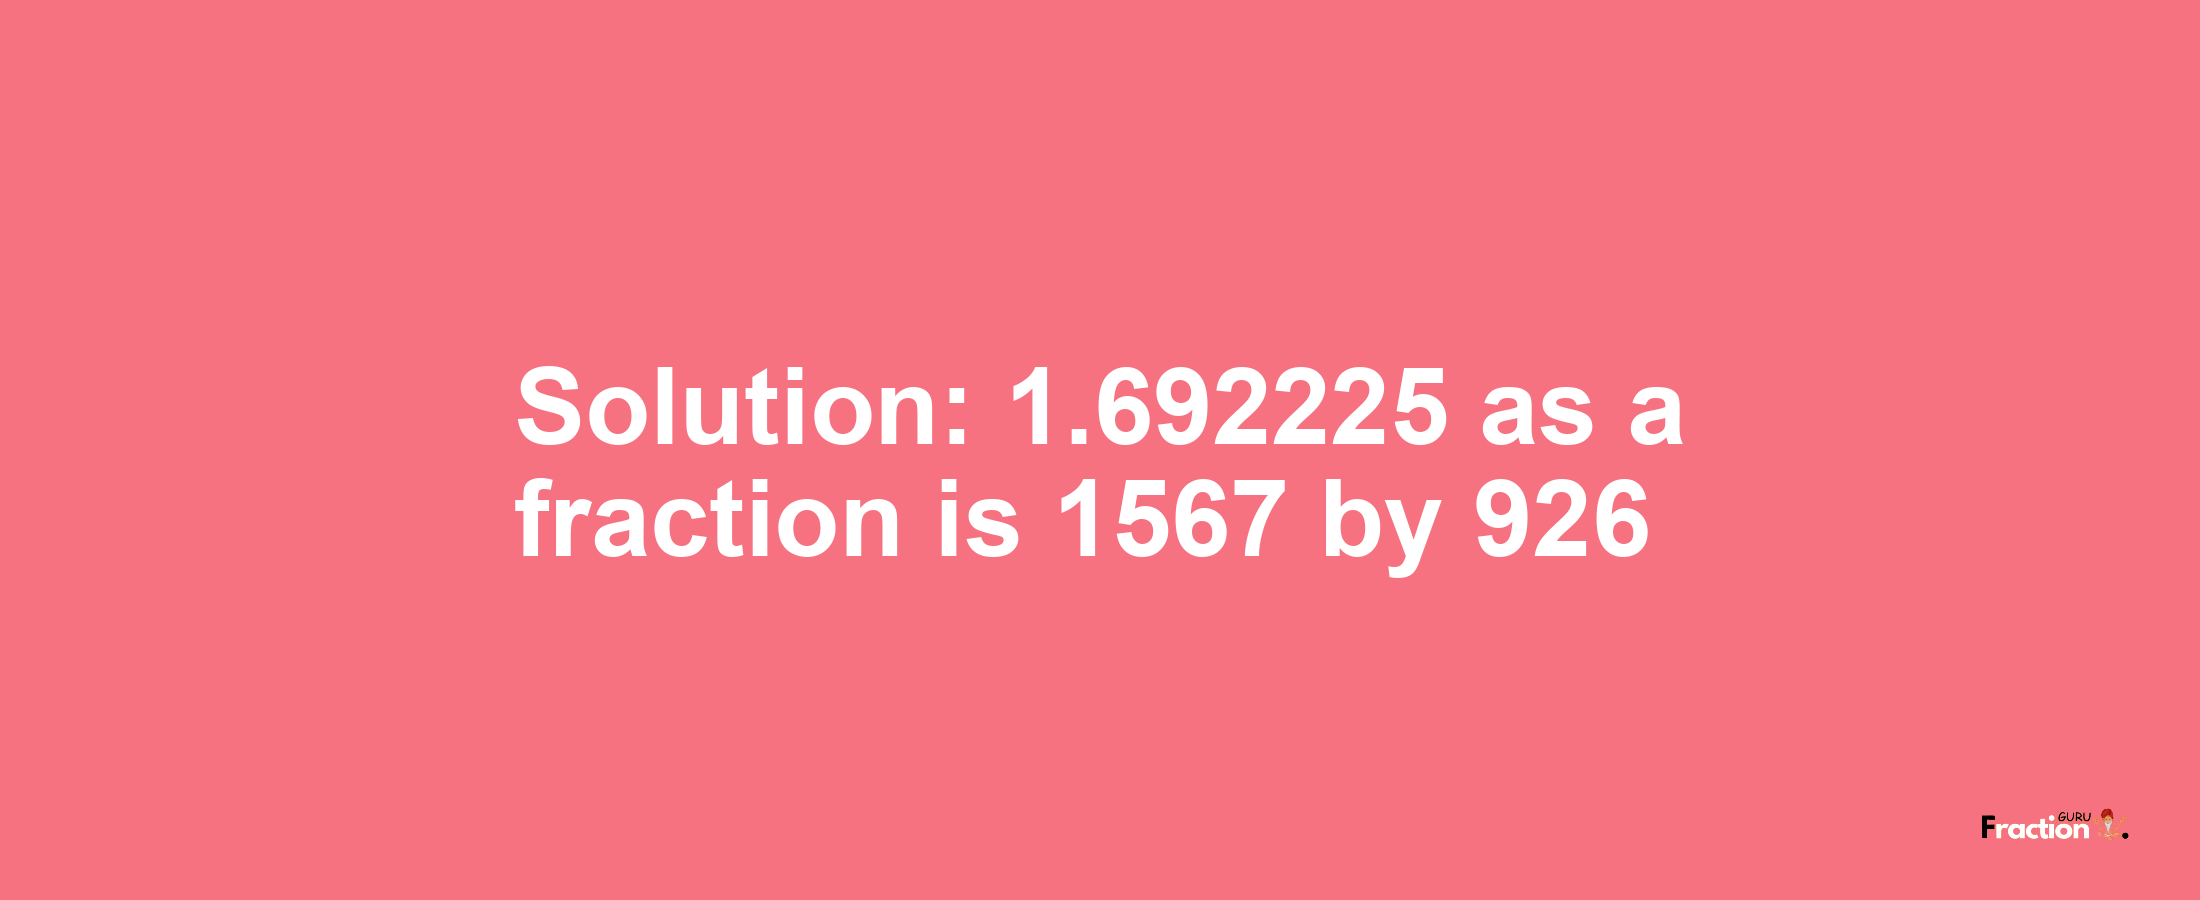 Solution:1.692225 as a fraction is 1567/926